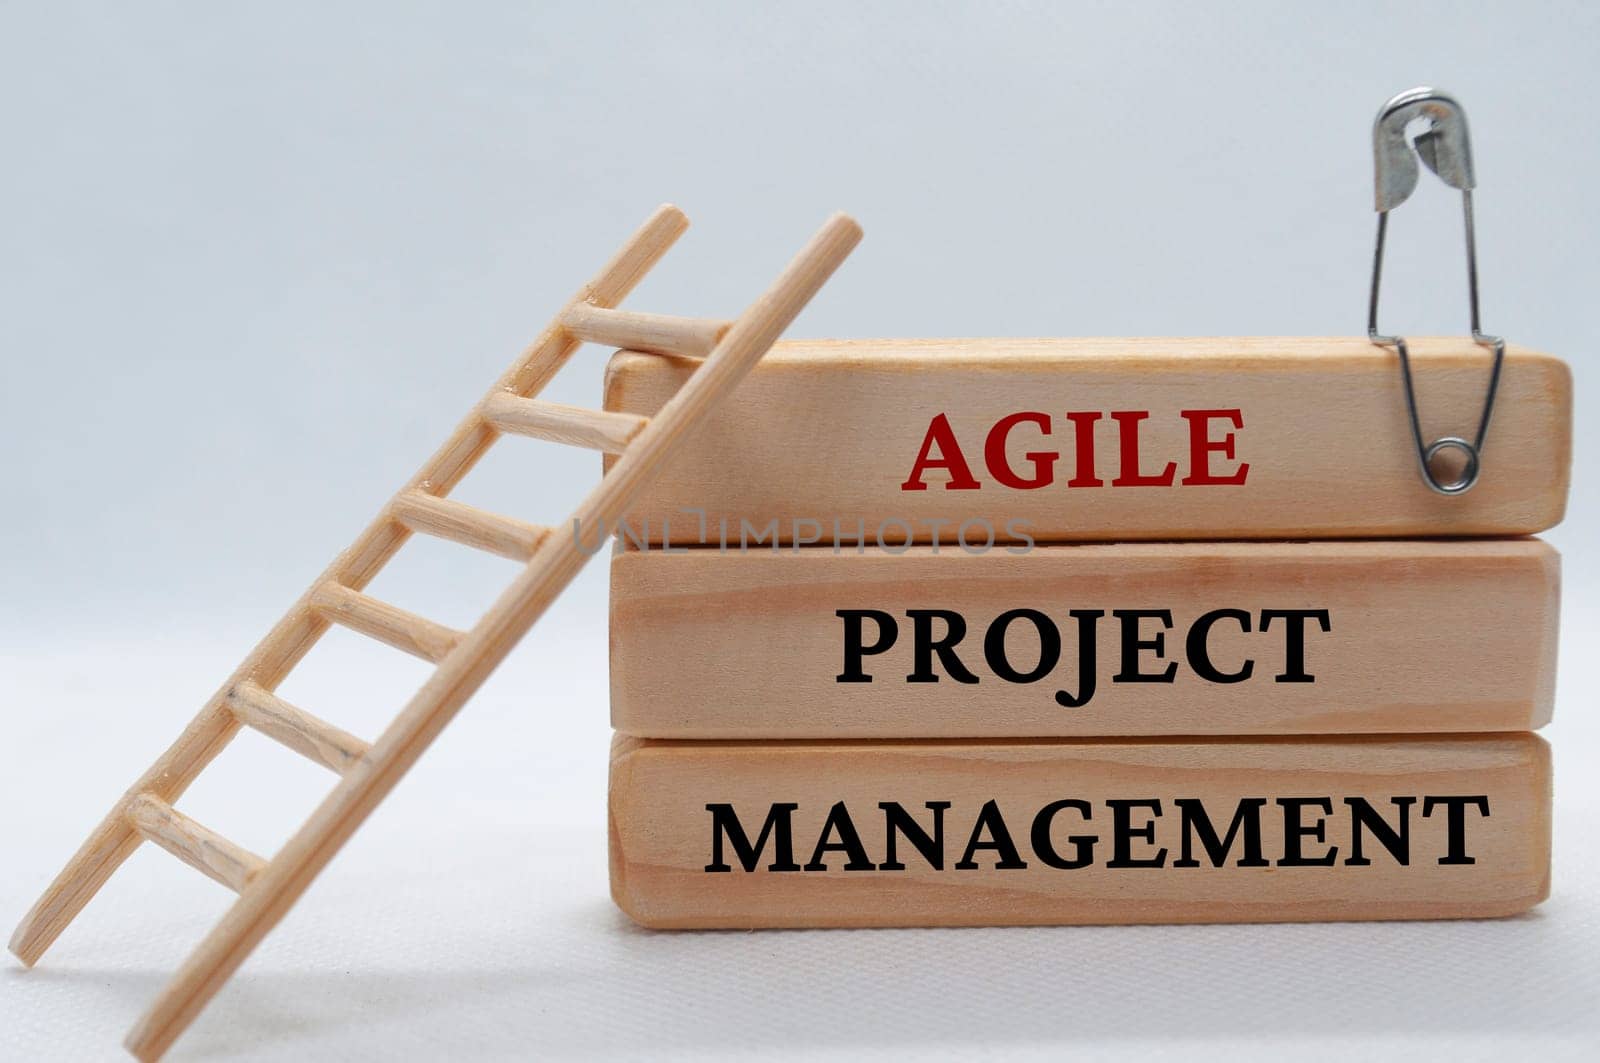 Agile project management text on wooden blocks with small toy ladder.